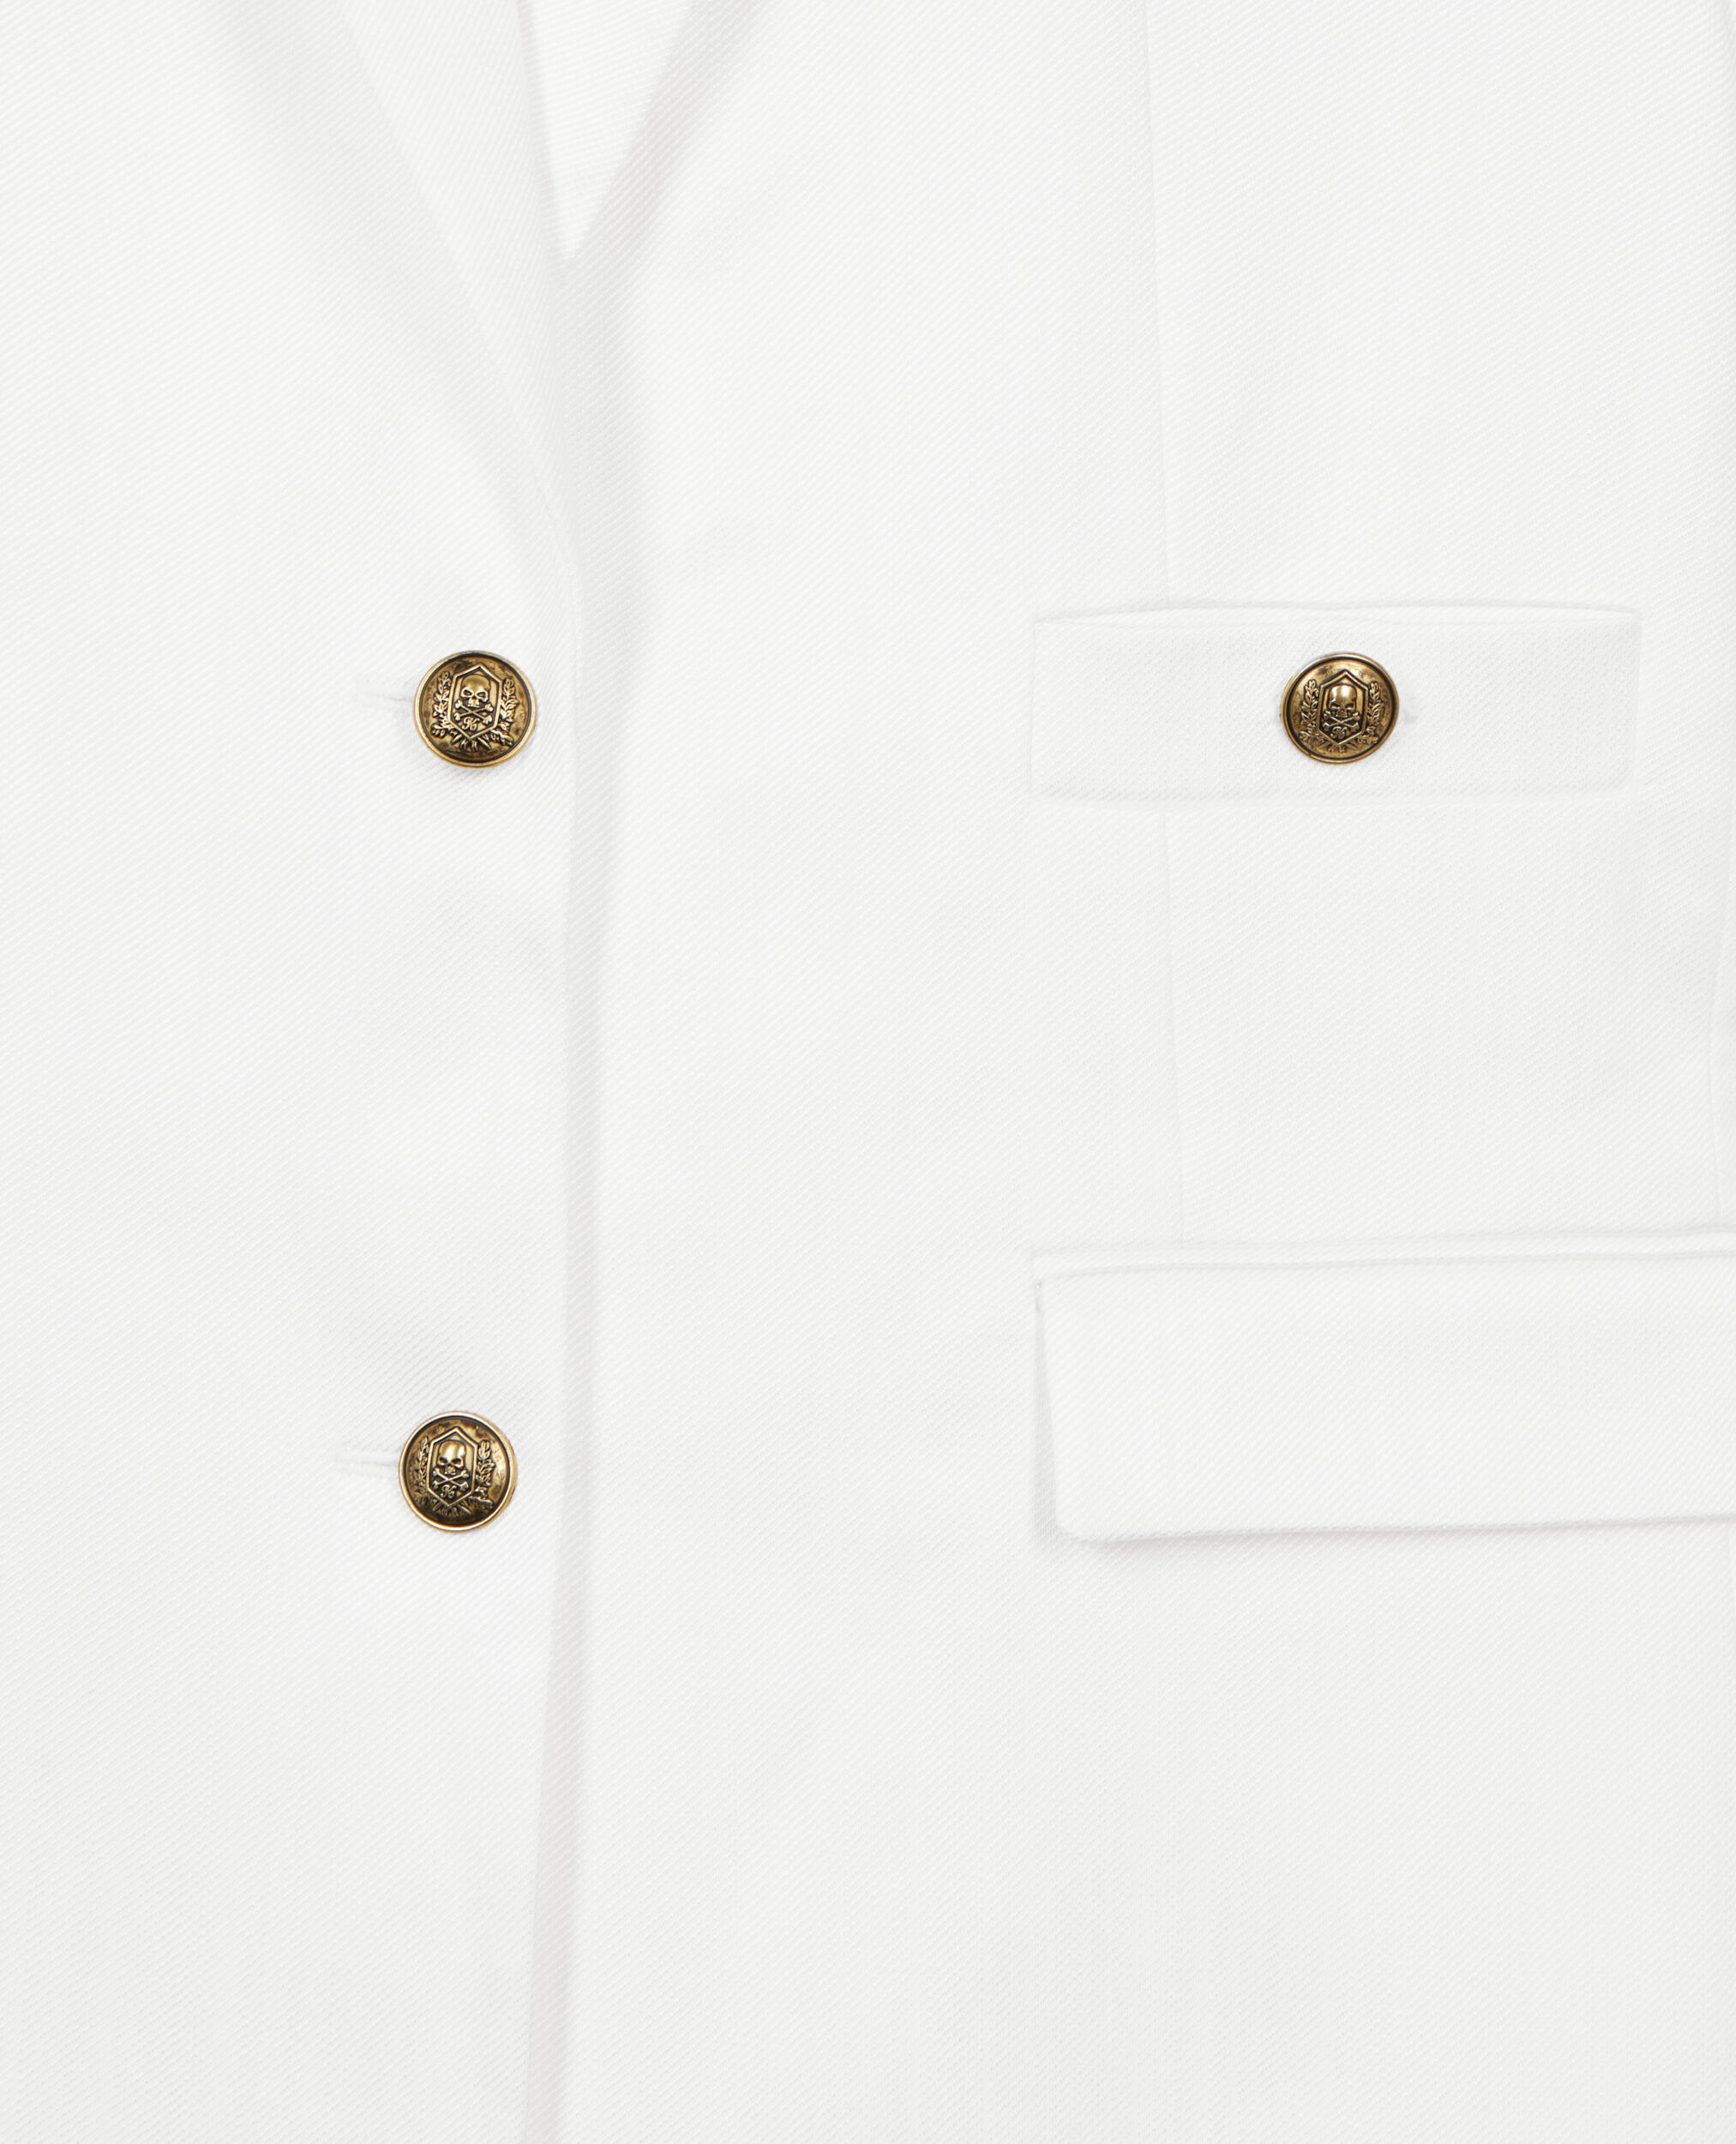 White suit jacket, WHITE, hi-res image number null